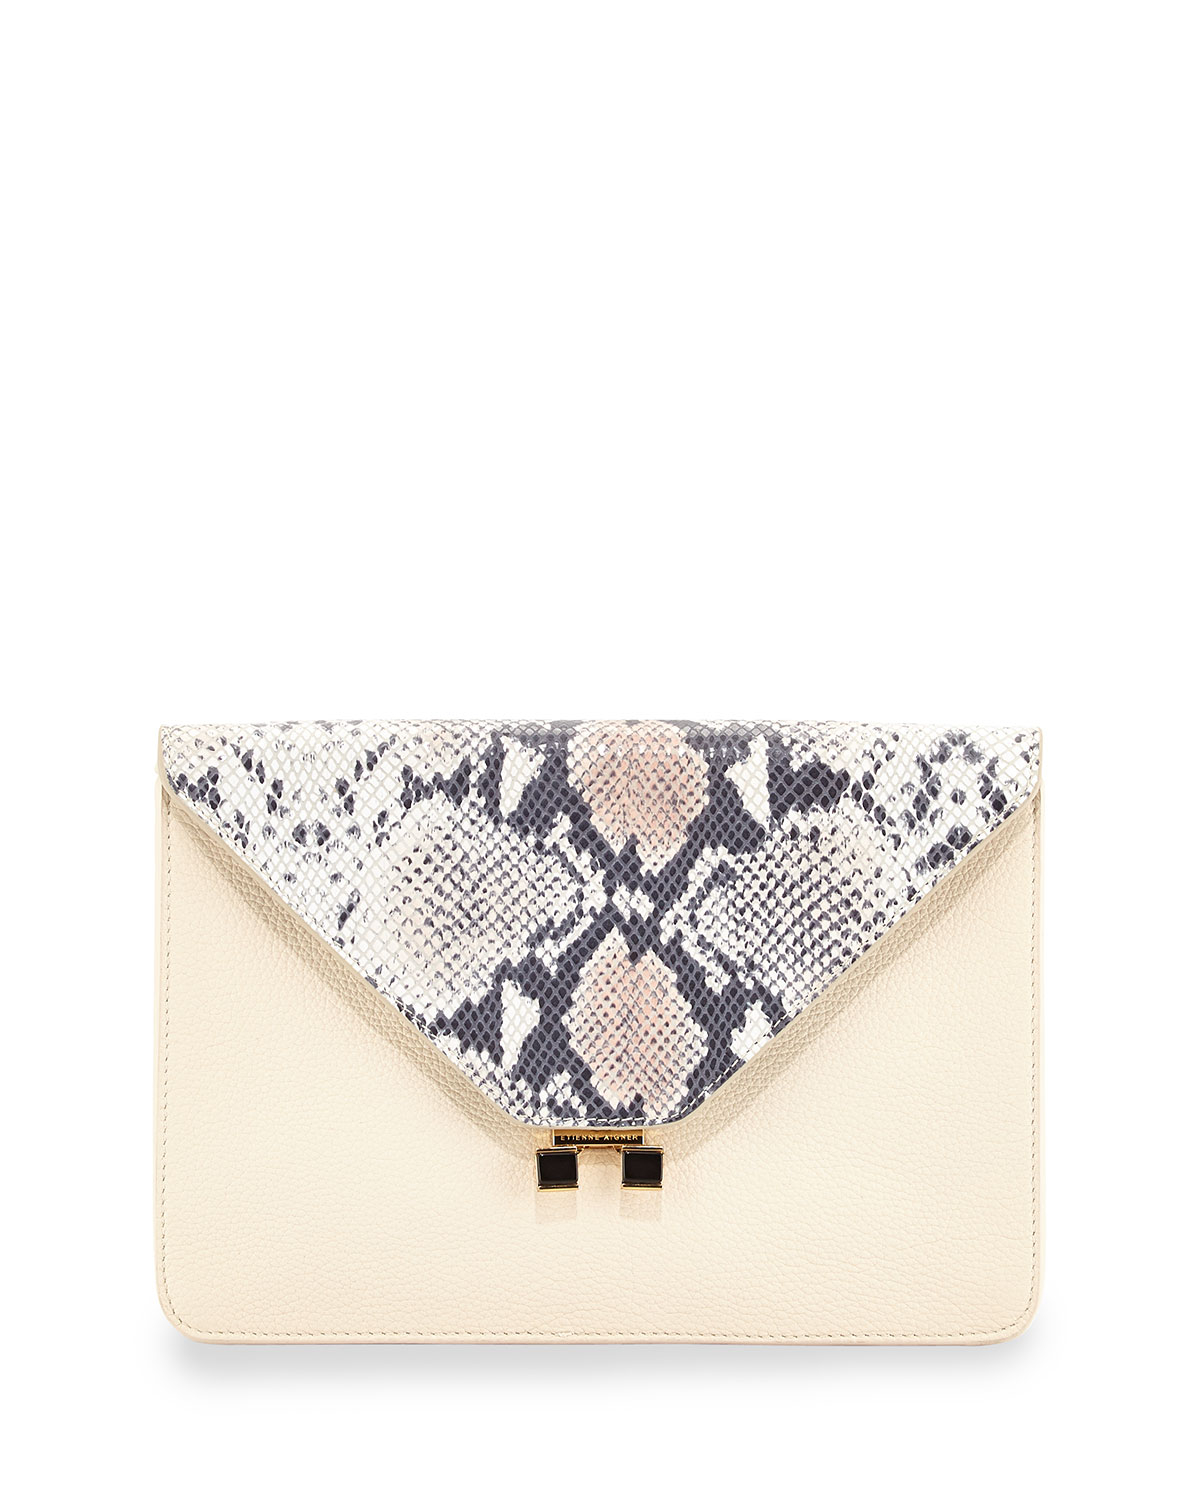 Lyst - Etienne Aigner Forester Snake-Embossed Leather Envelope Clutch in Natural